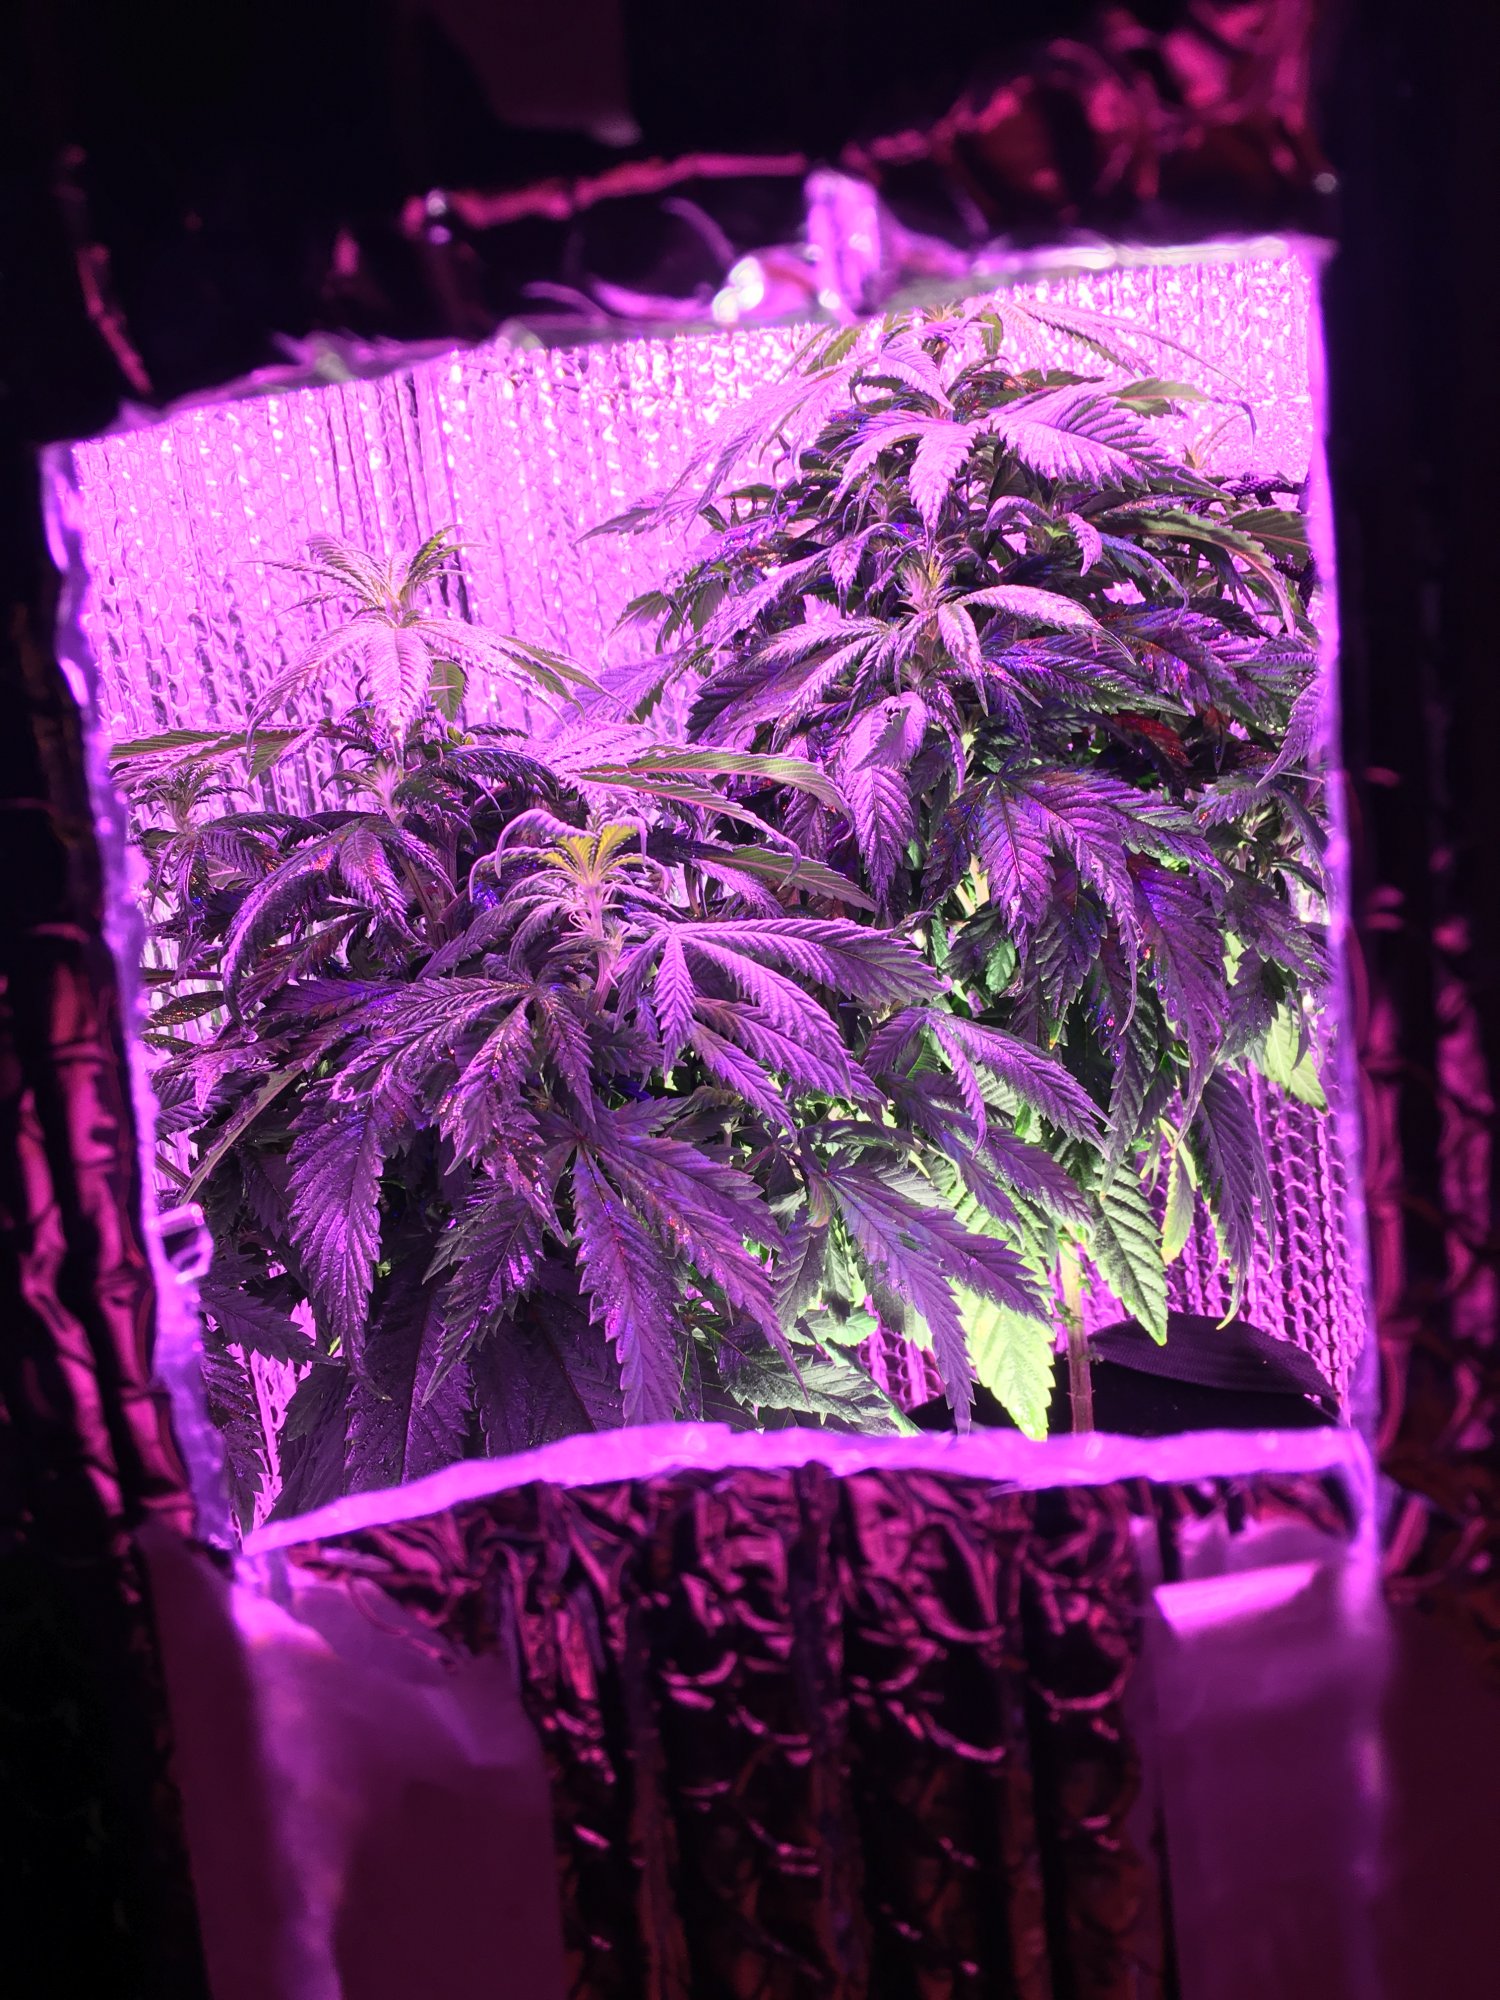 Light escape and bloom or veg 5